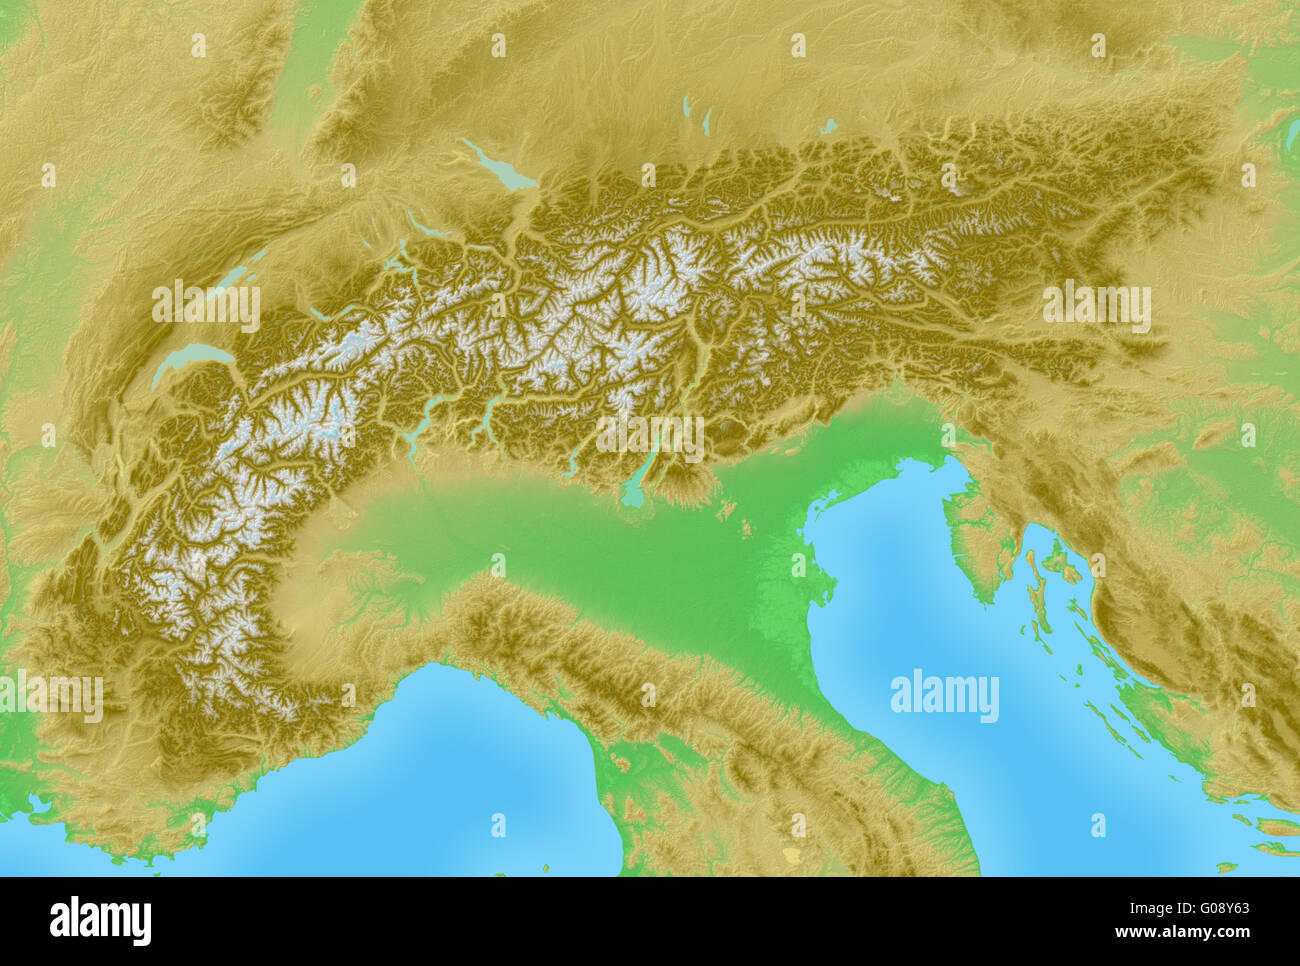 Alps topographical relief map Stock Photo